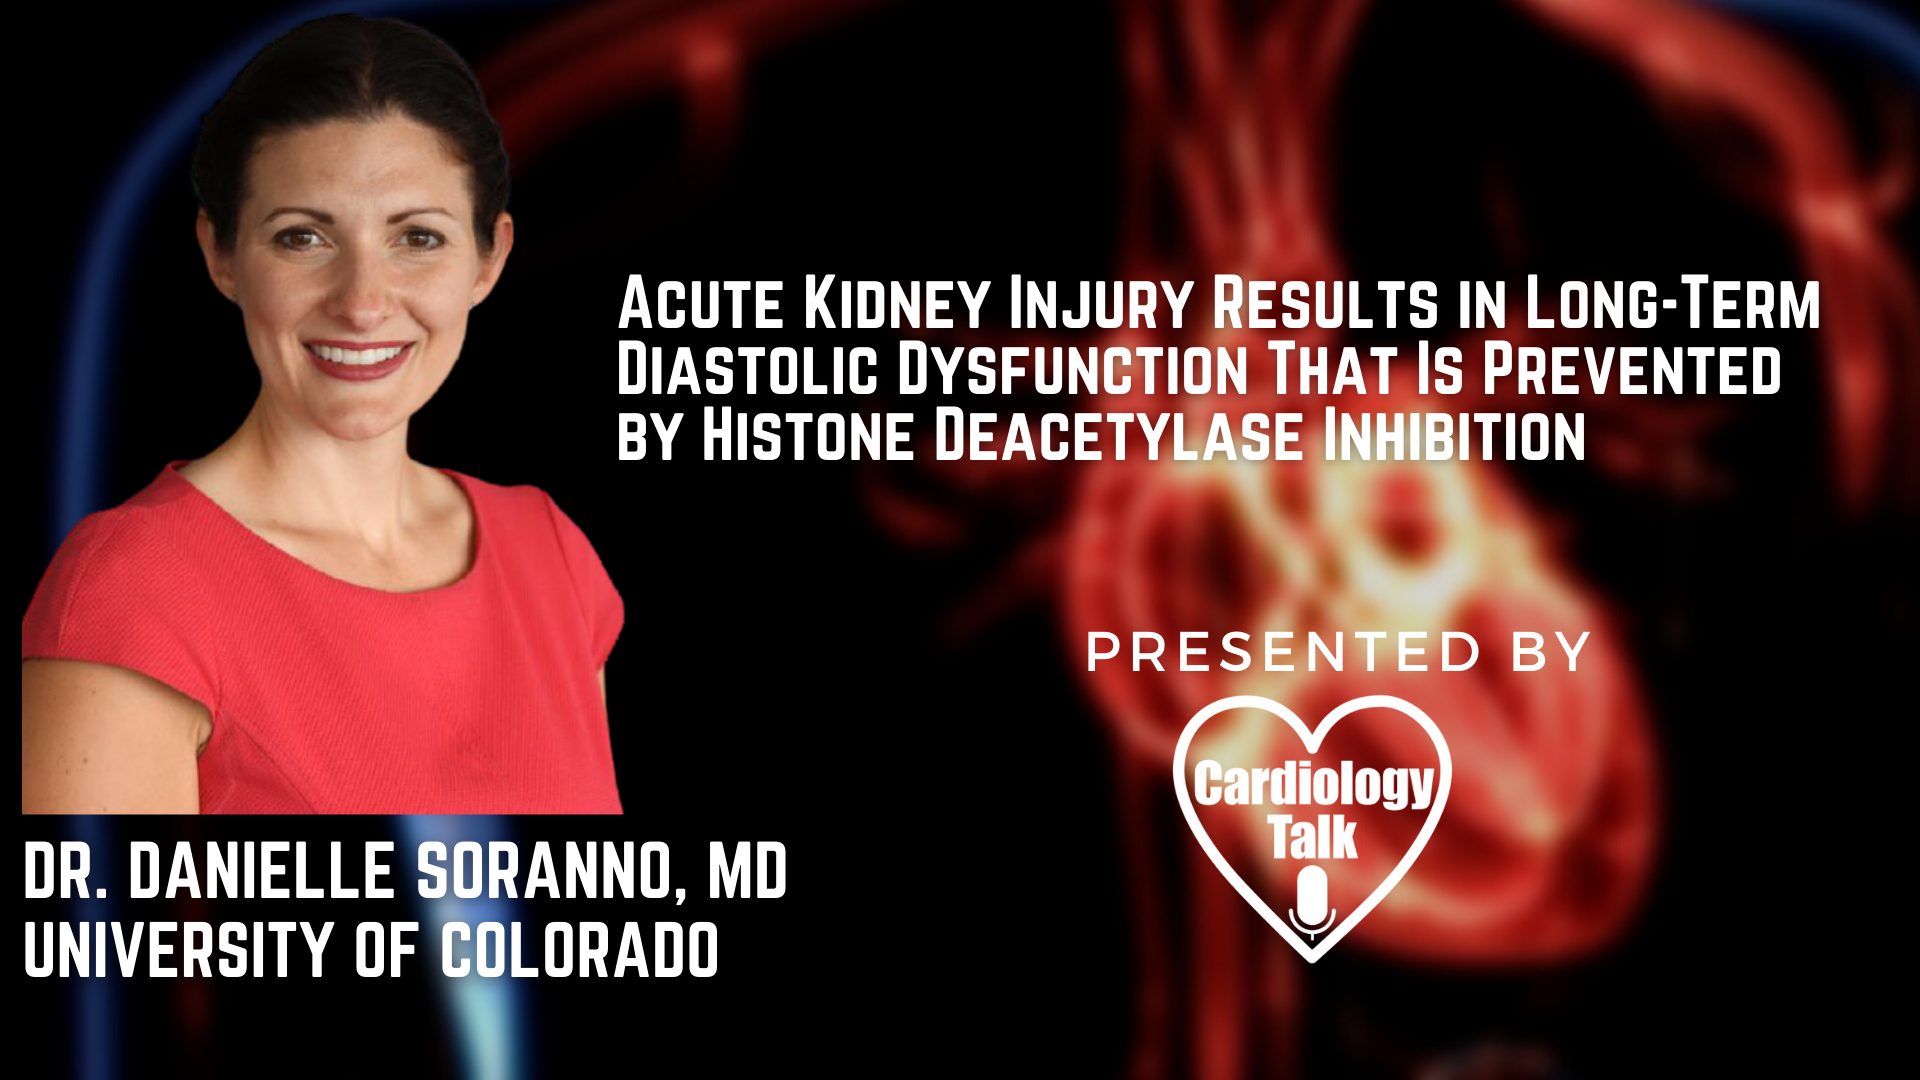 Dr. Danielle Soranno, MD- Acute Kidney Injury Results in Long-Term Diastolic Dysfunction That Is Prevented by Histone Deacetylase Inhibition @DanielleSoranno   @CUSystem  #DiastolicDysfun...